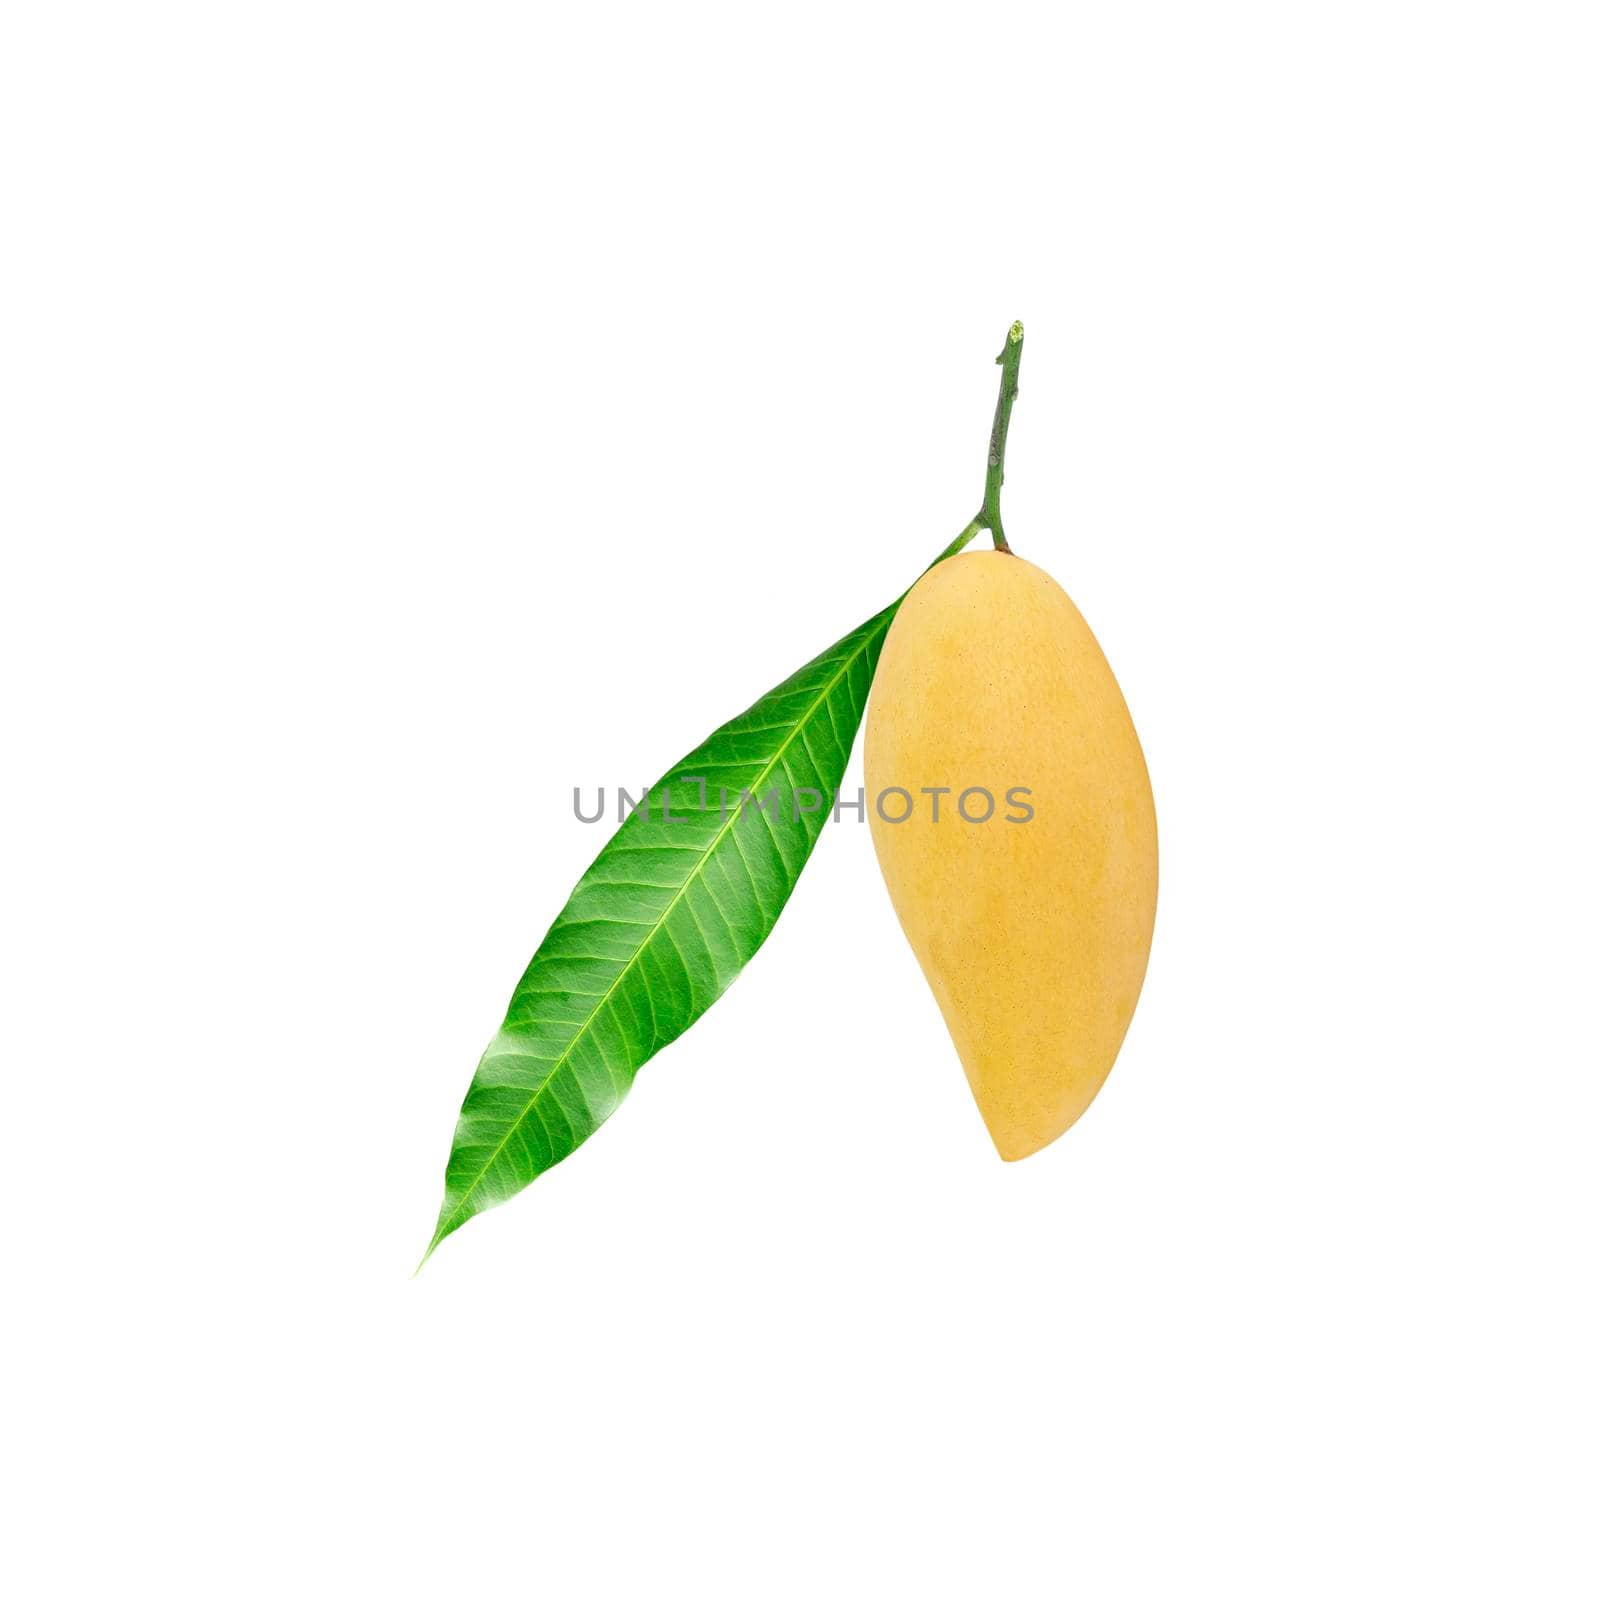 Yellow ripe mango with green leaf isolated on white background